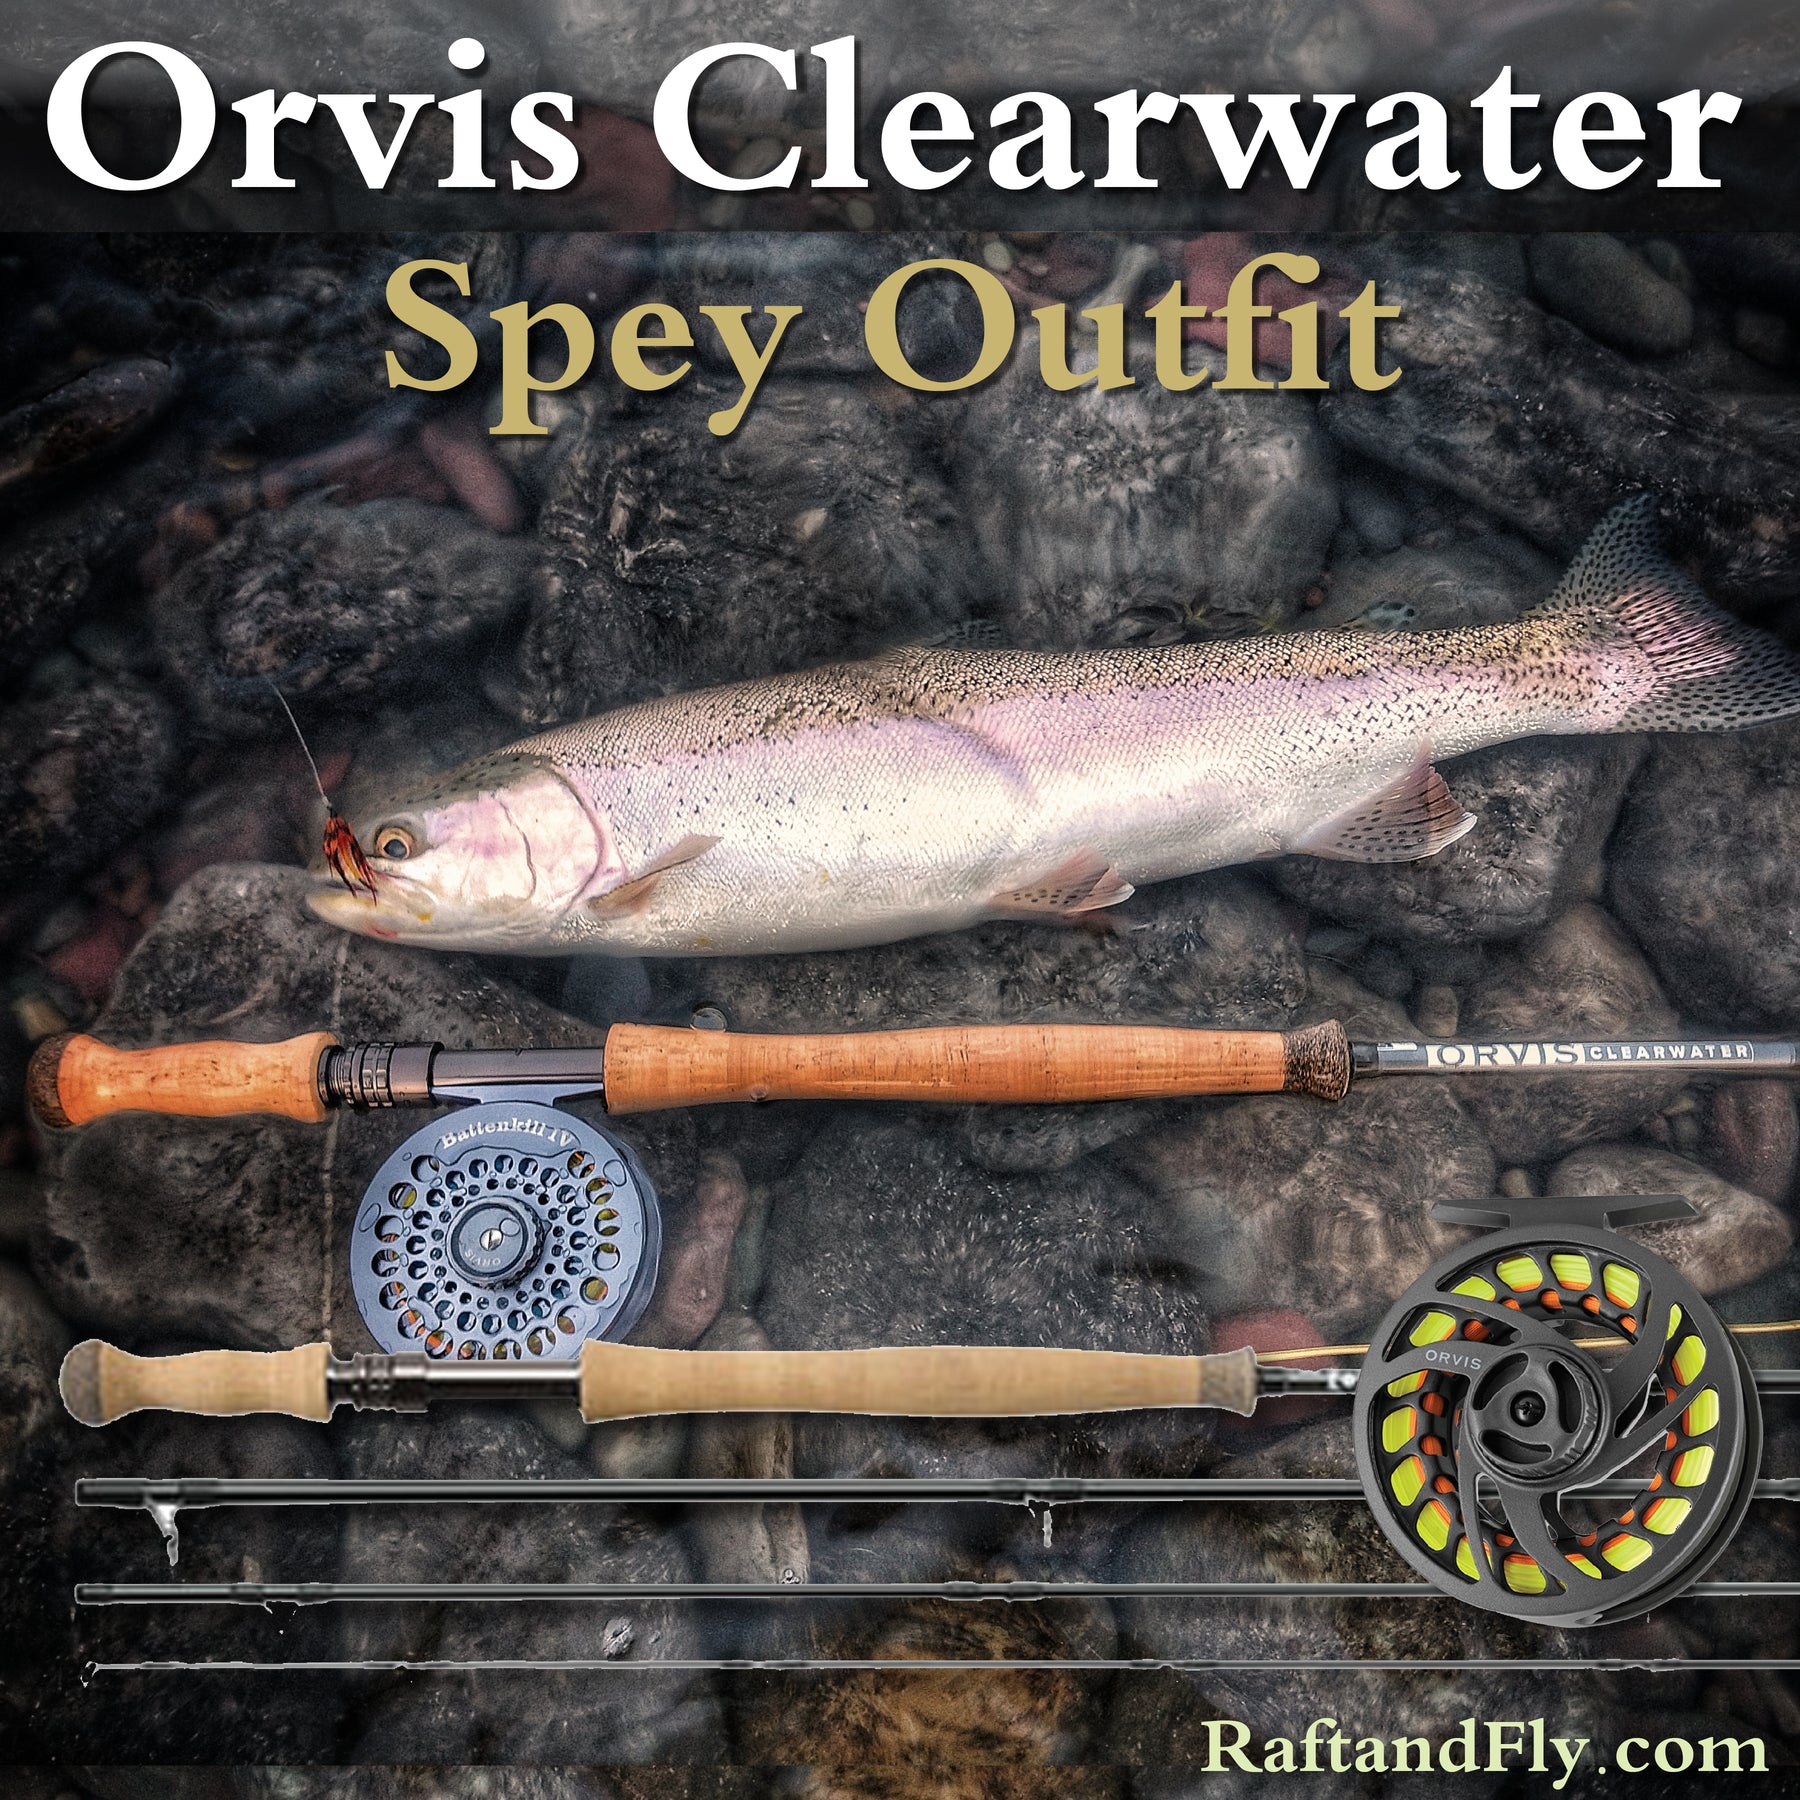 Orvis Clearwater Euro Nymphing Outfit - Duranglers Fly Fishing Shop & Guides